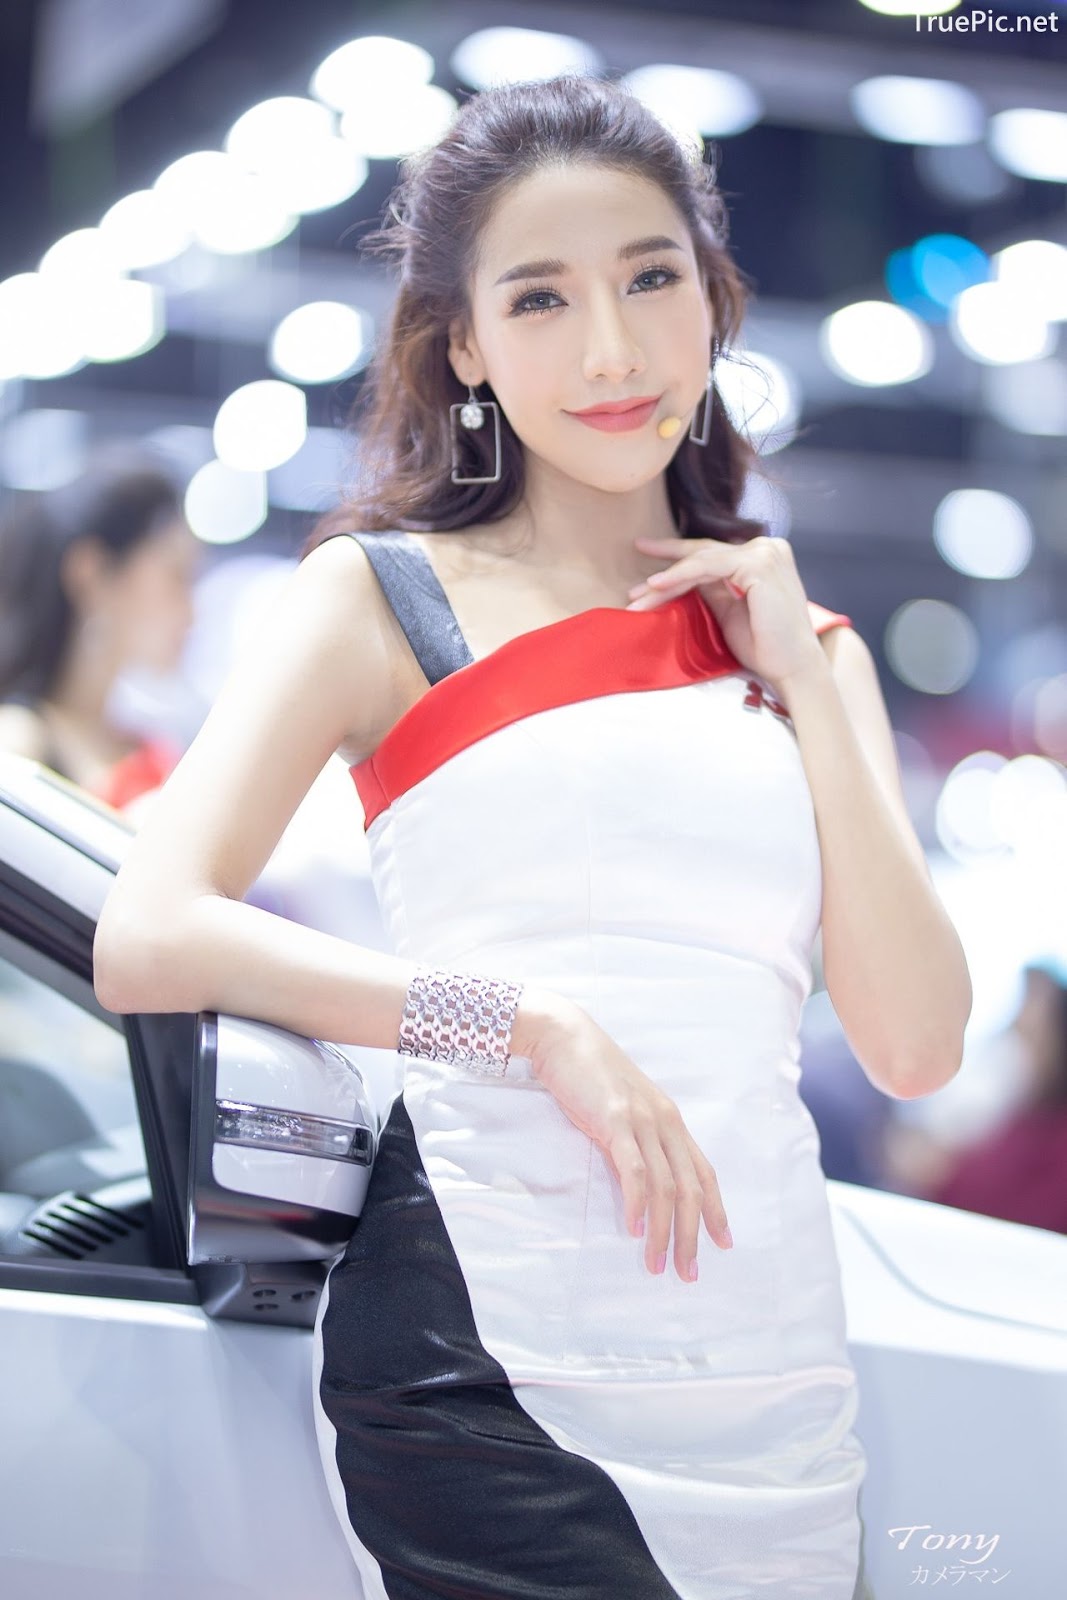 Image-Thailand-Hot-Model-Thai-Racing-Girl-At-Motor-Expo-2019-TruePic.net- Picture-62